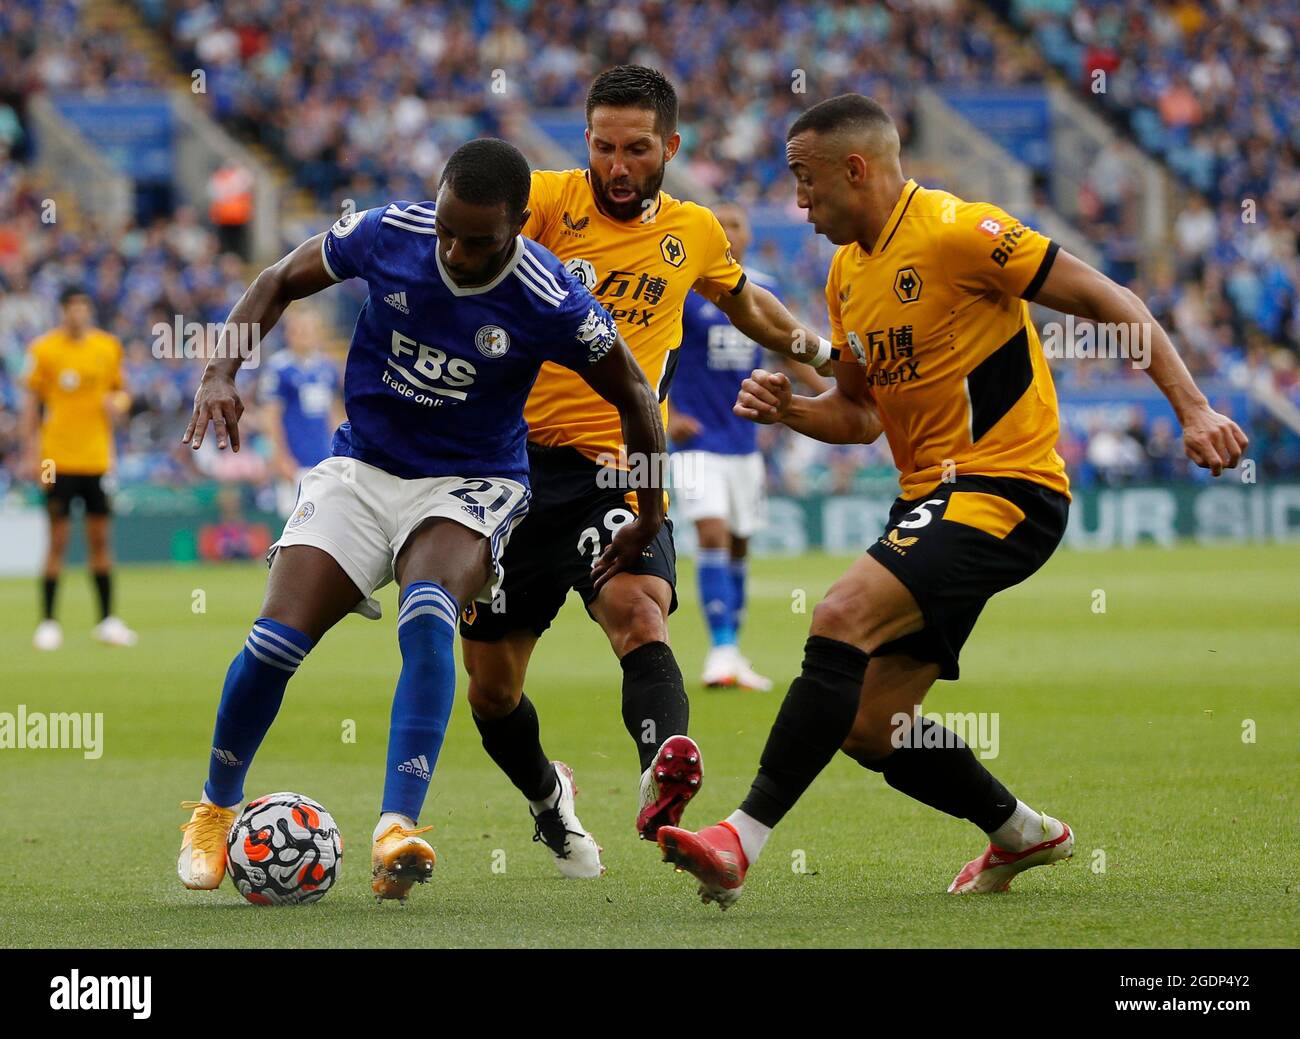 Leicester, England, 14th August 2021.  Marcal and Joao Moutinho of Wolverhampton Wanderers challenge Ricardo Pereira of Leicester City during the Premier League match at the King Power Stadium, Leicester. Picture credit should read: Darren Staples / Sportimage Stock Photo